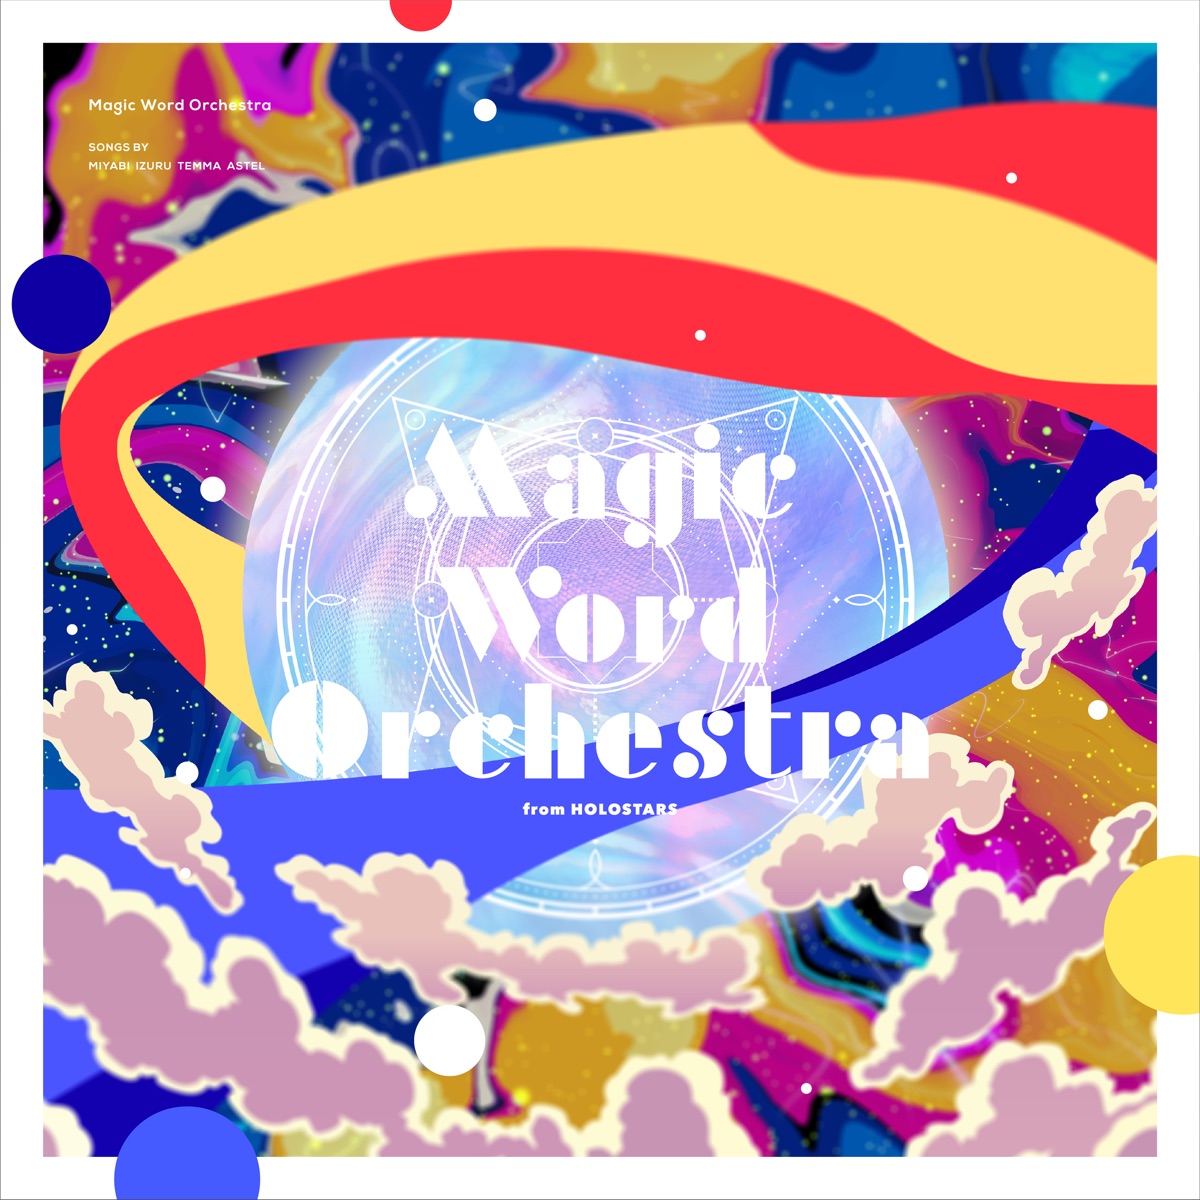 Cover art for『HOLOSTARS - Magic Word Orchestra』from the release『Magic Word Orchestra』